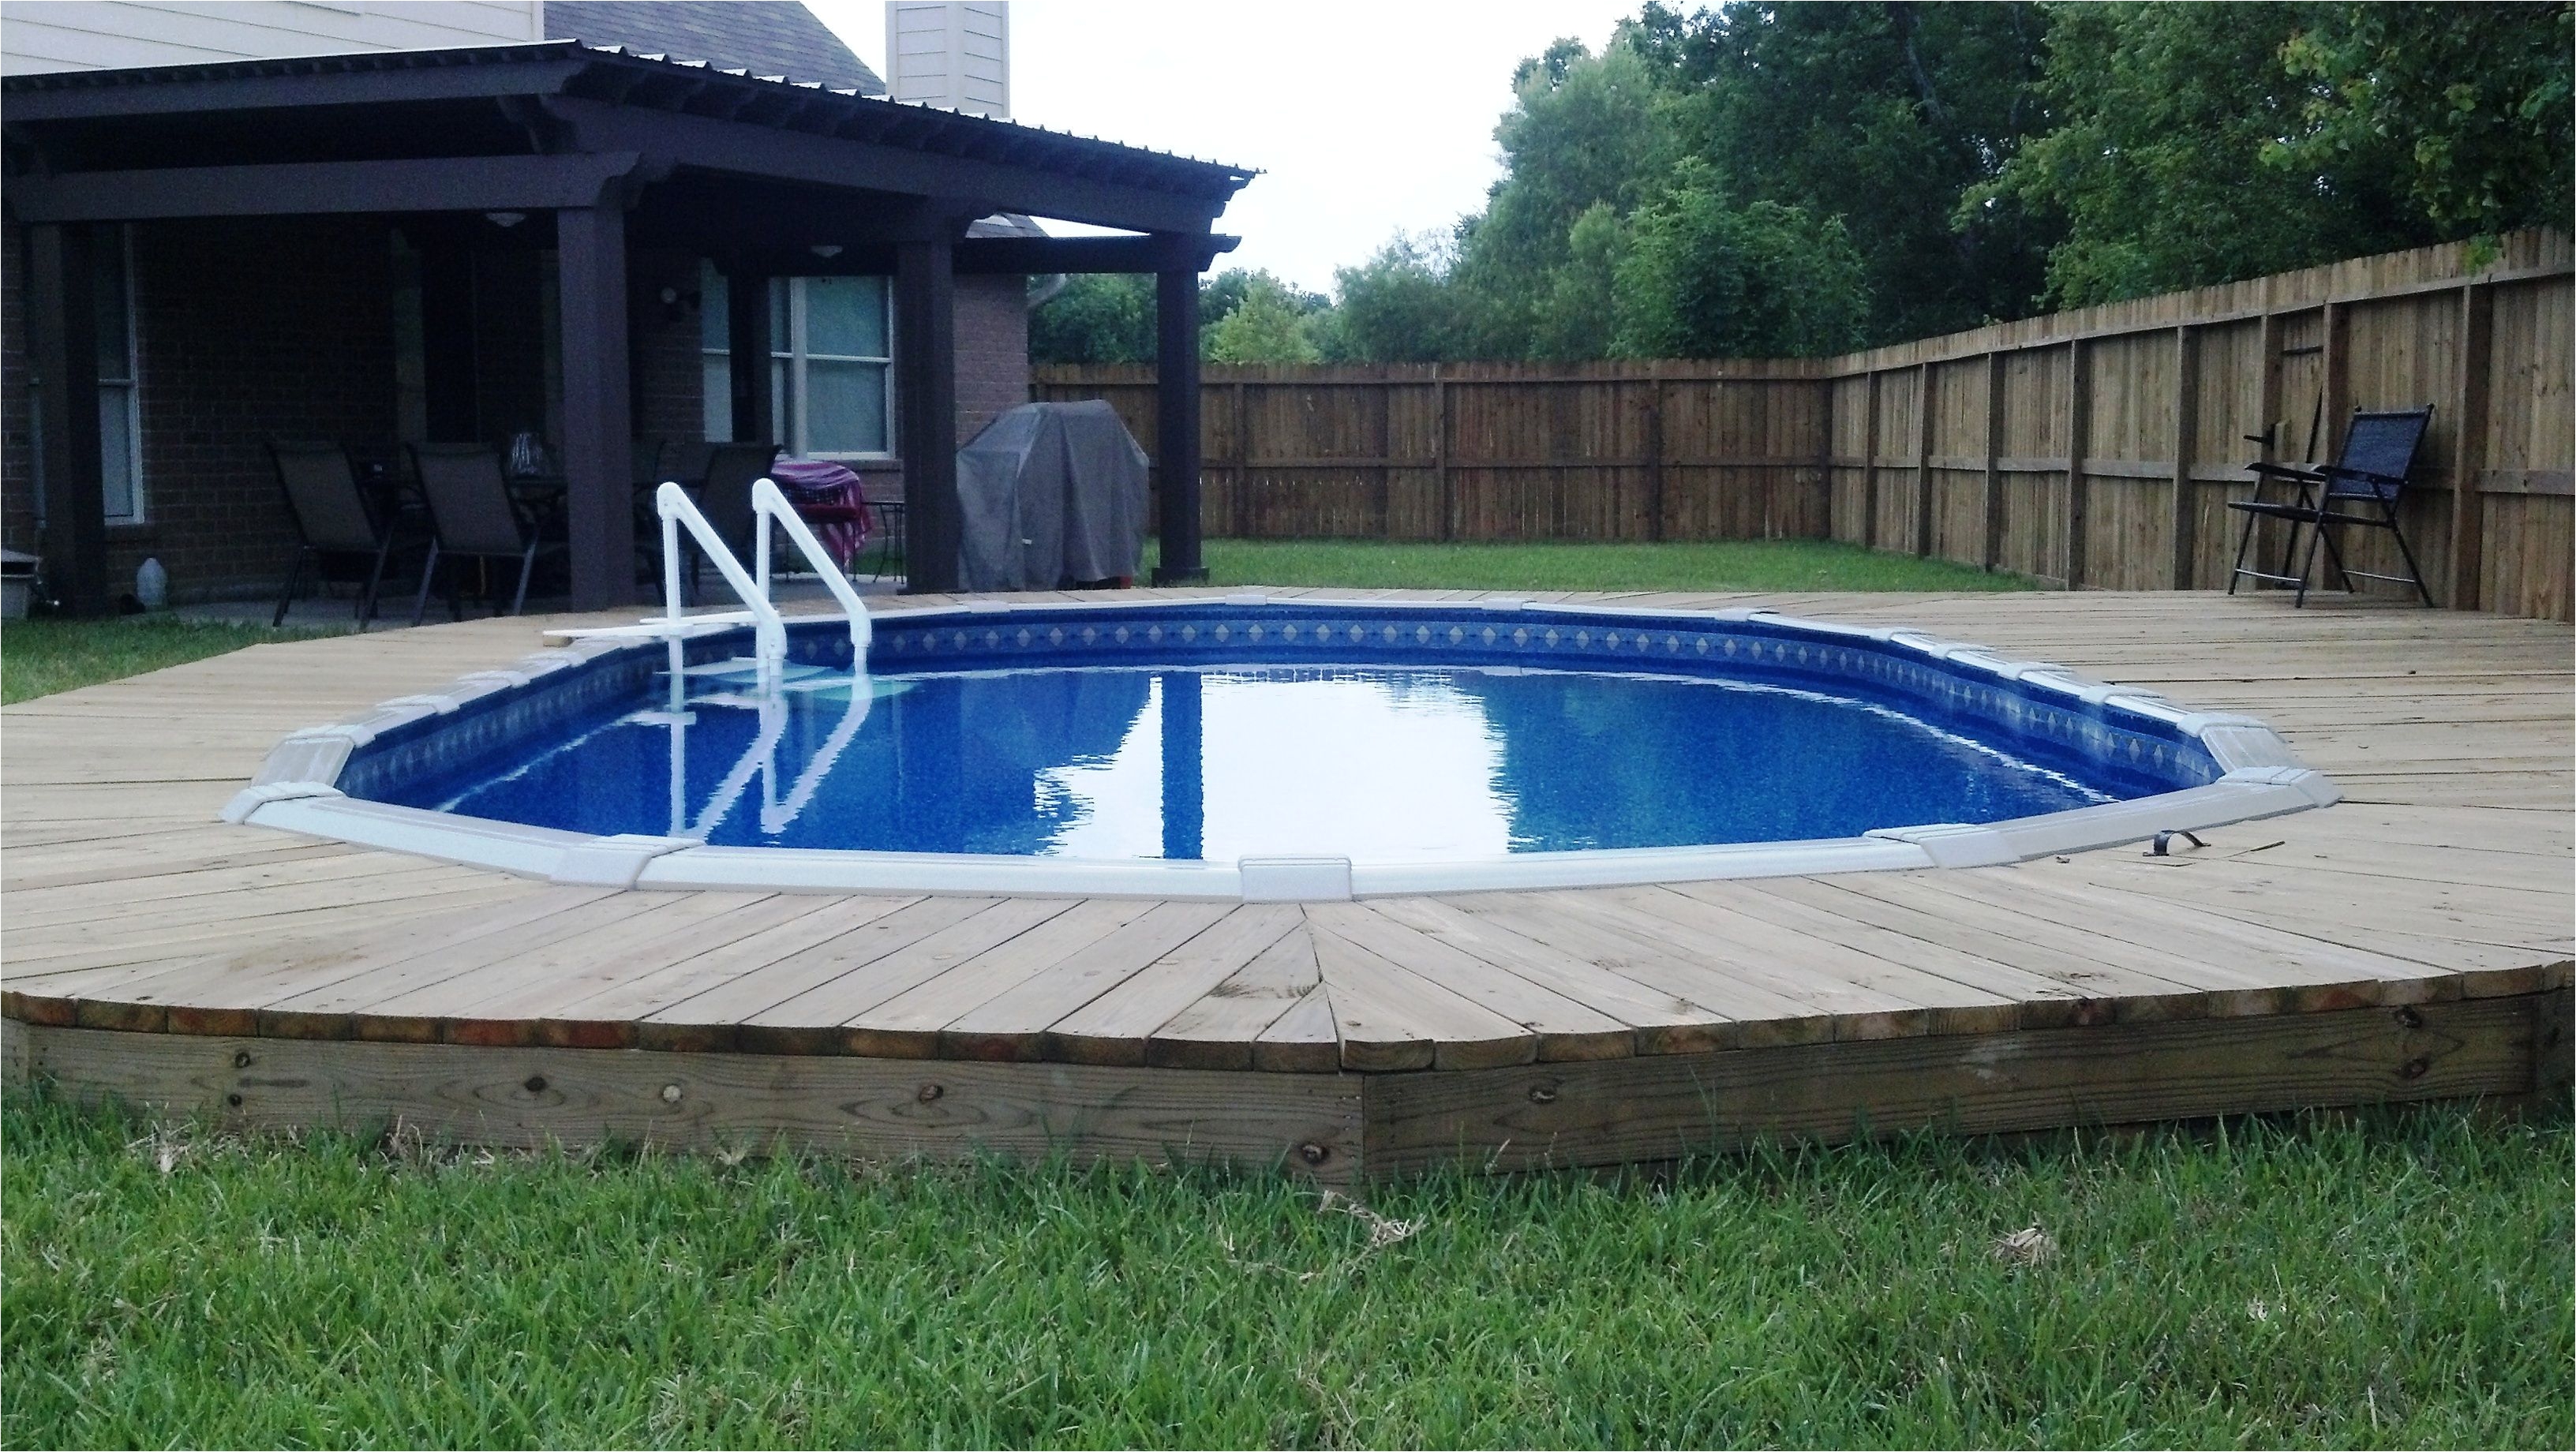 Above Ground Swimming Pool Floor Padding Countersunk Above Ground Pool with Deck Gives the Feel Of An